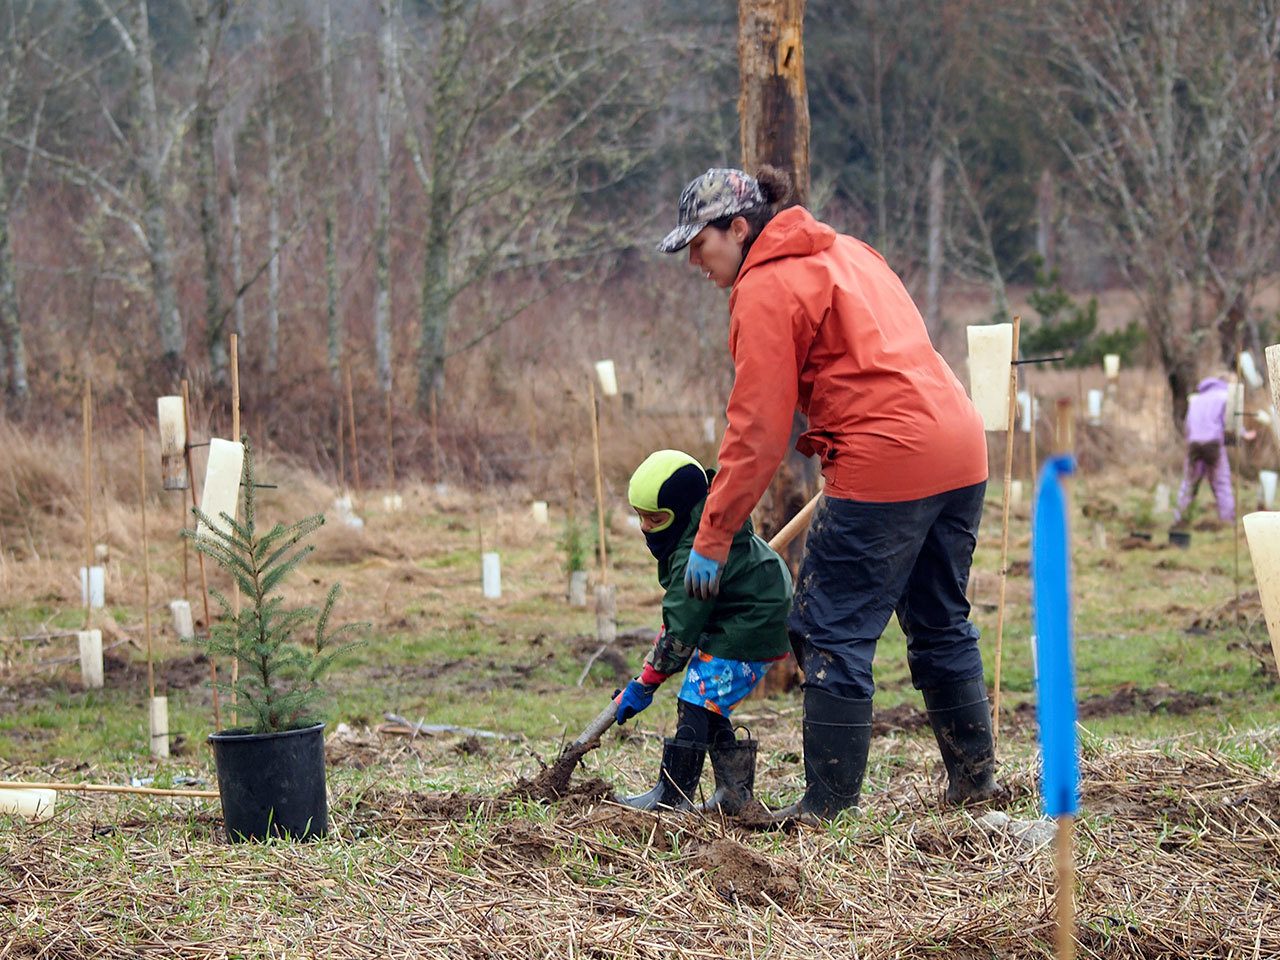 Nicolas Harper and Samantha Trone from Swan School in Port Townsend were among the 140 volunteers planting trees at Tarboo Wildlife Preserve near Quilcene on Feb 4. (Connie Gallant)